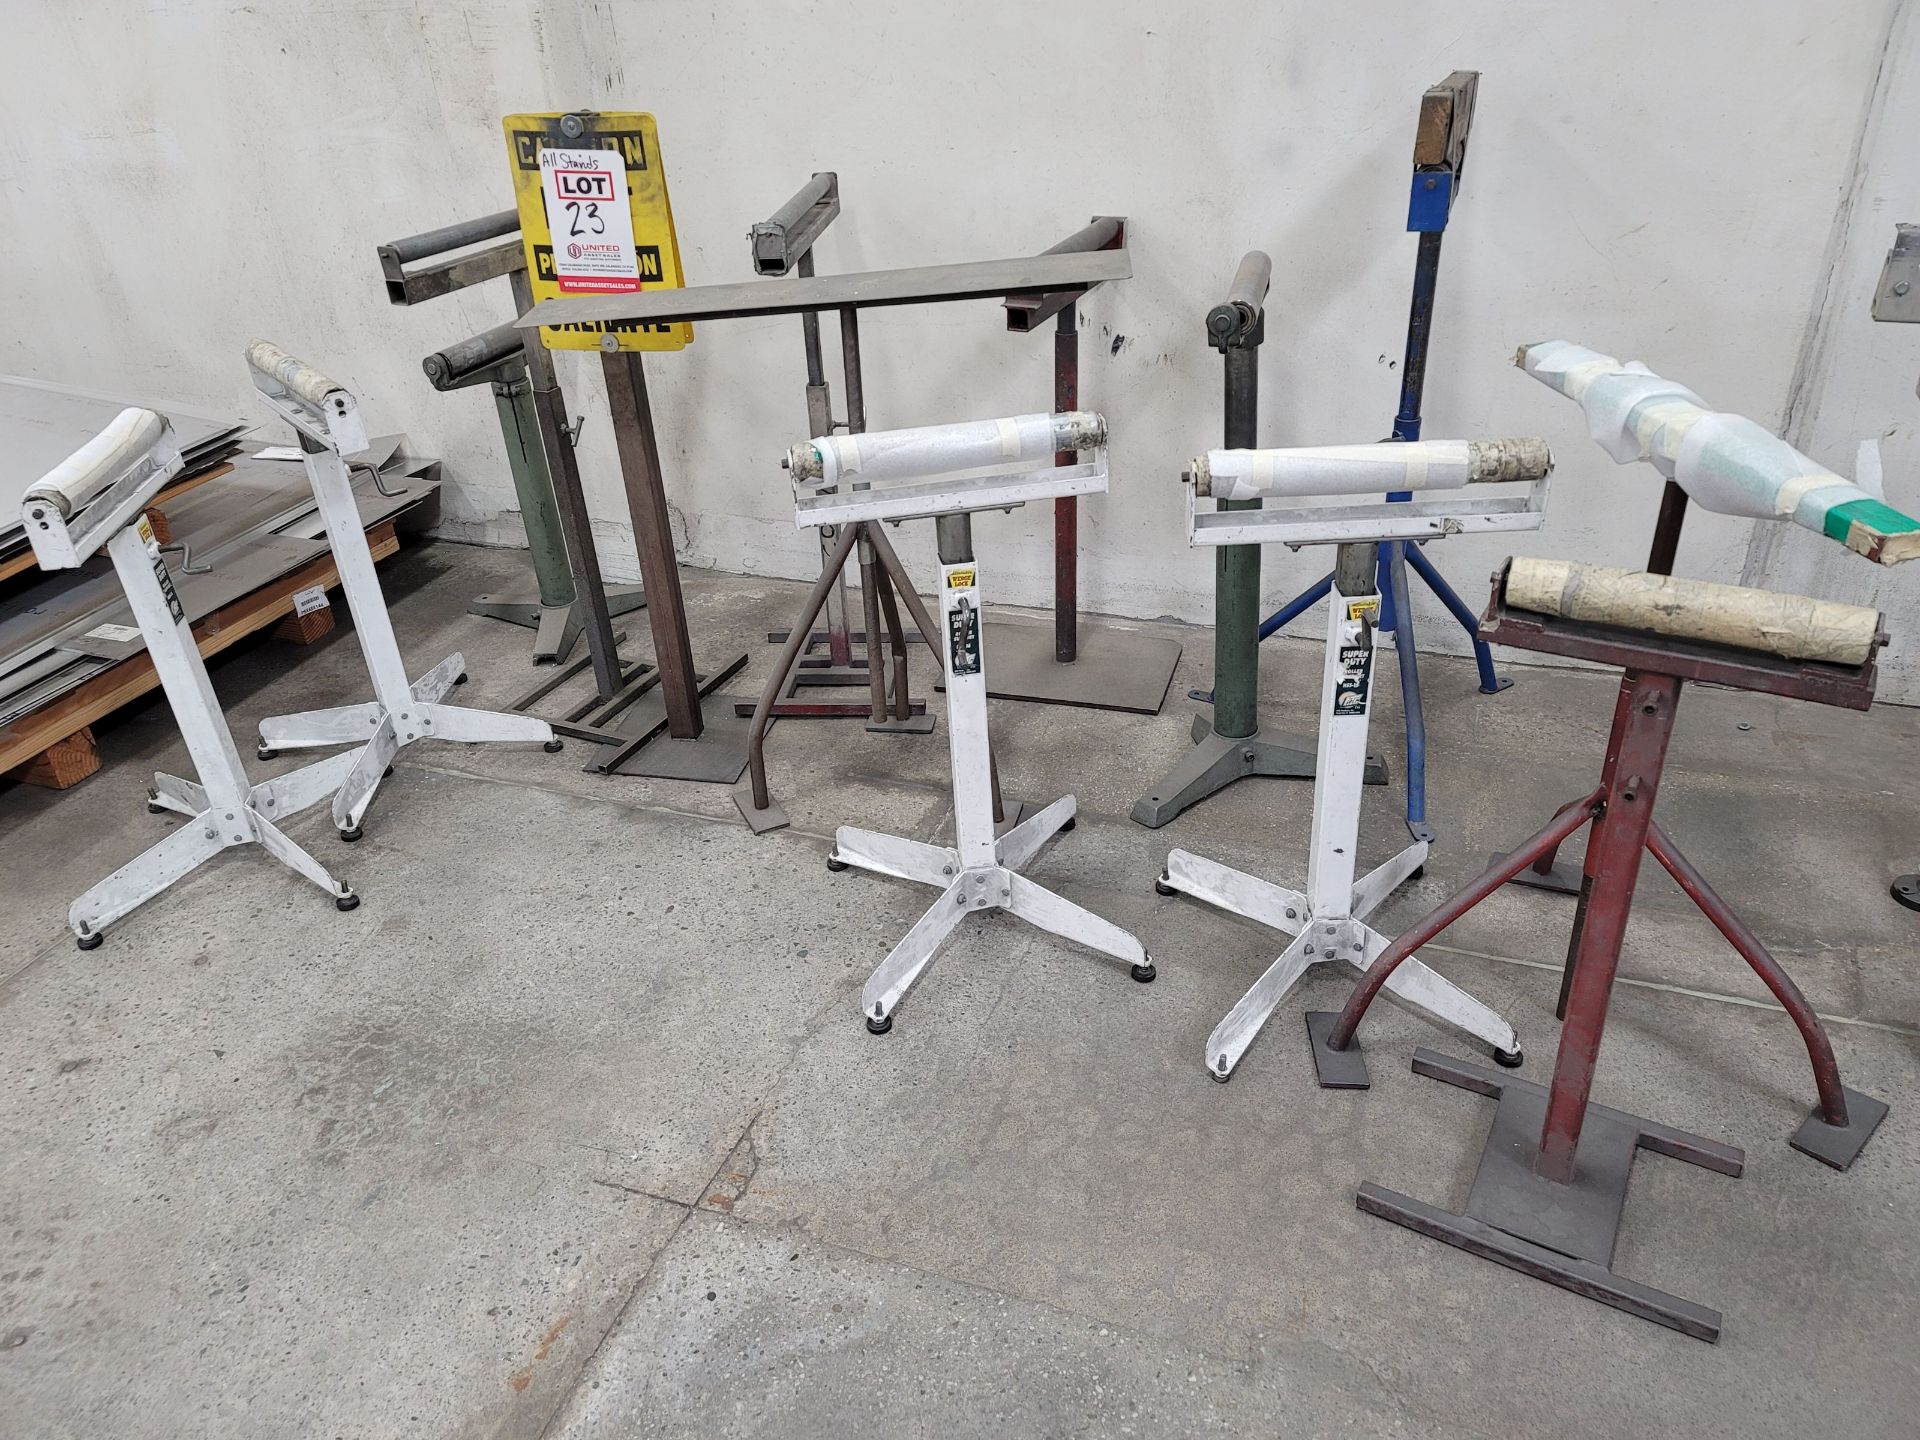 LOT - MATERIAL STANDS